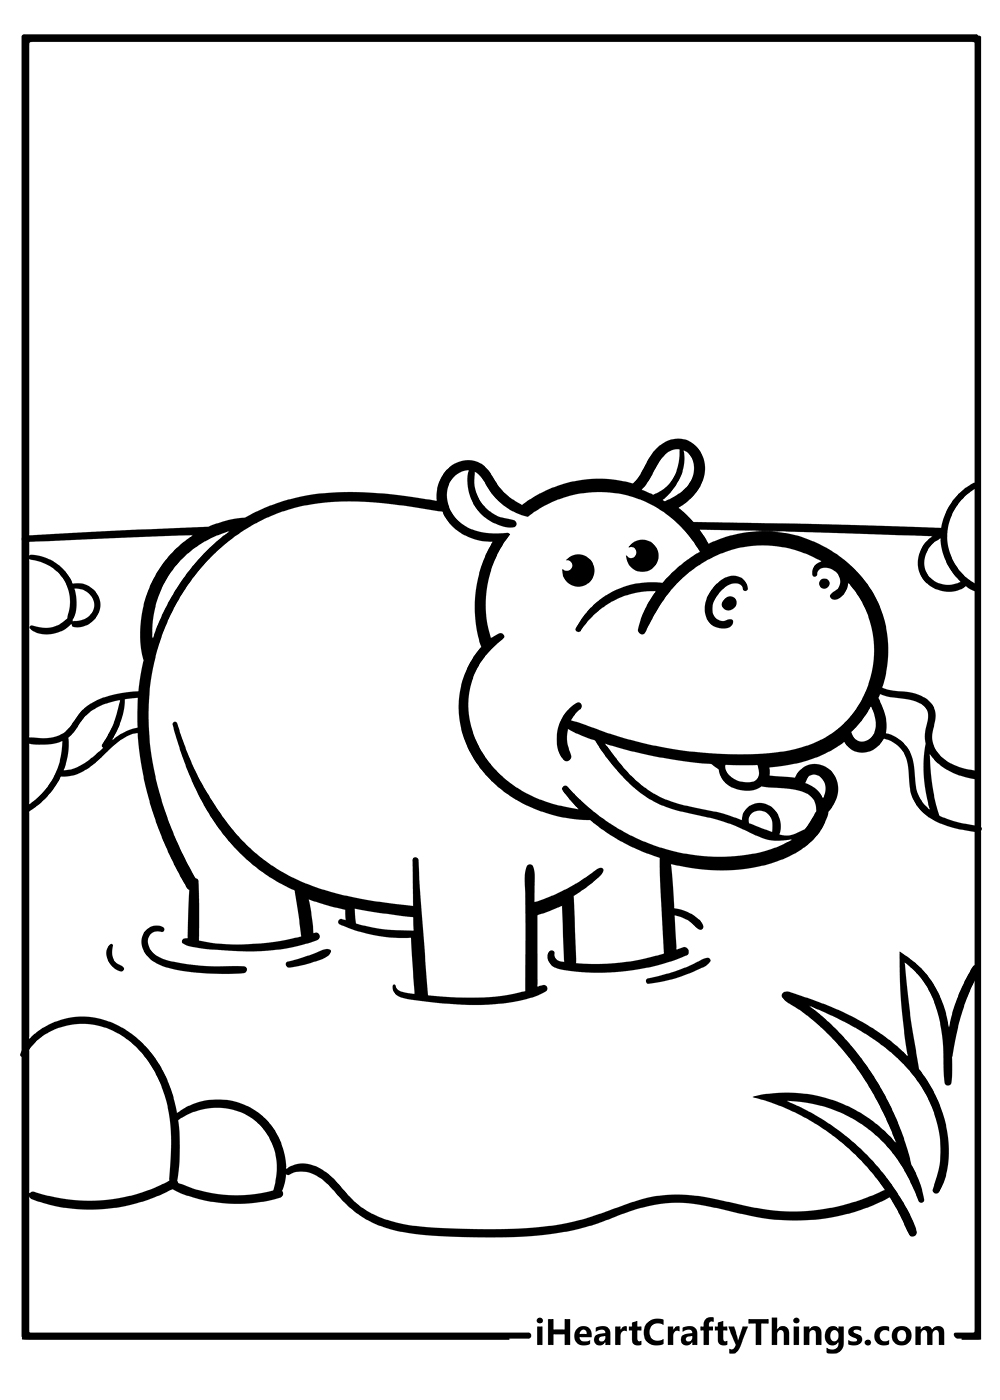 Hippo Coloring Book for adults free download